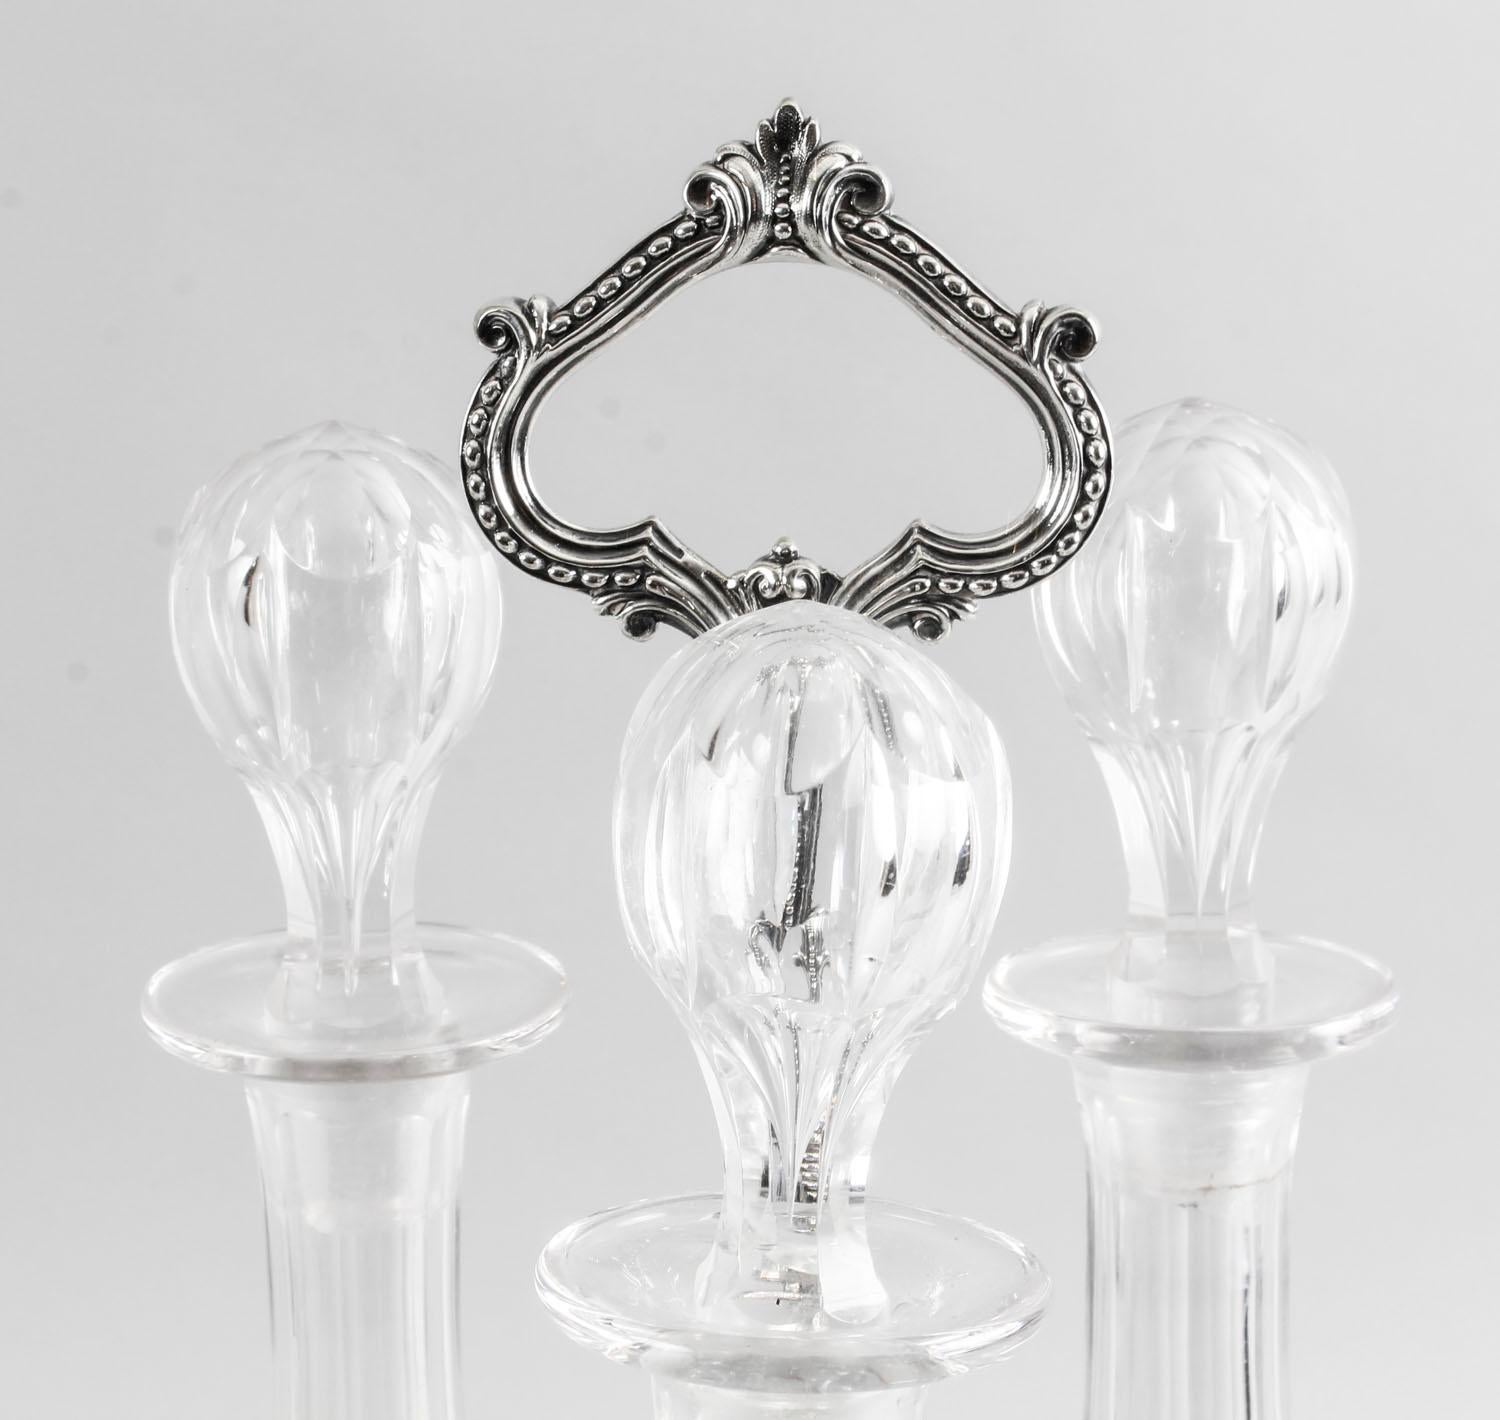 Good quality Elkington plate three bottle tantalus.

This is an attractive Old Sheffield silver plated tantalus stand with three Bohemian decanters with stoppers, in the classic English style and circa 1840 in date.

The silver plated decanter